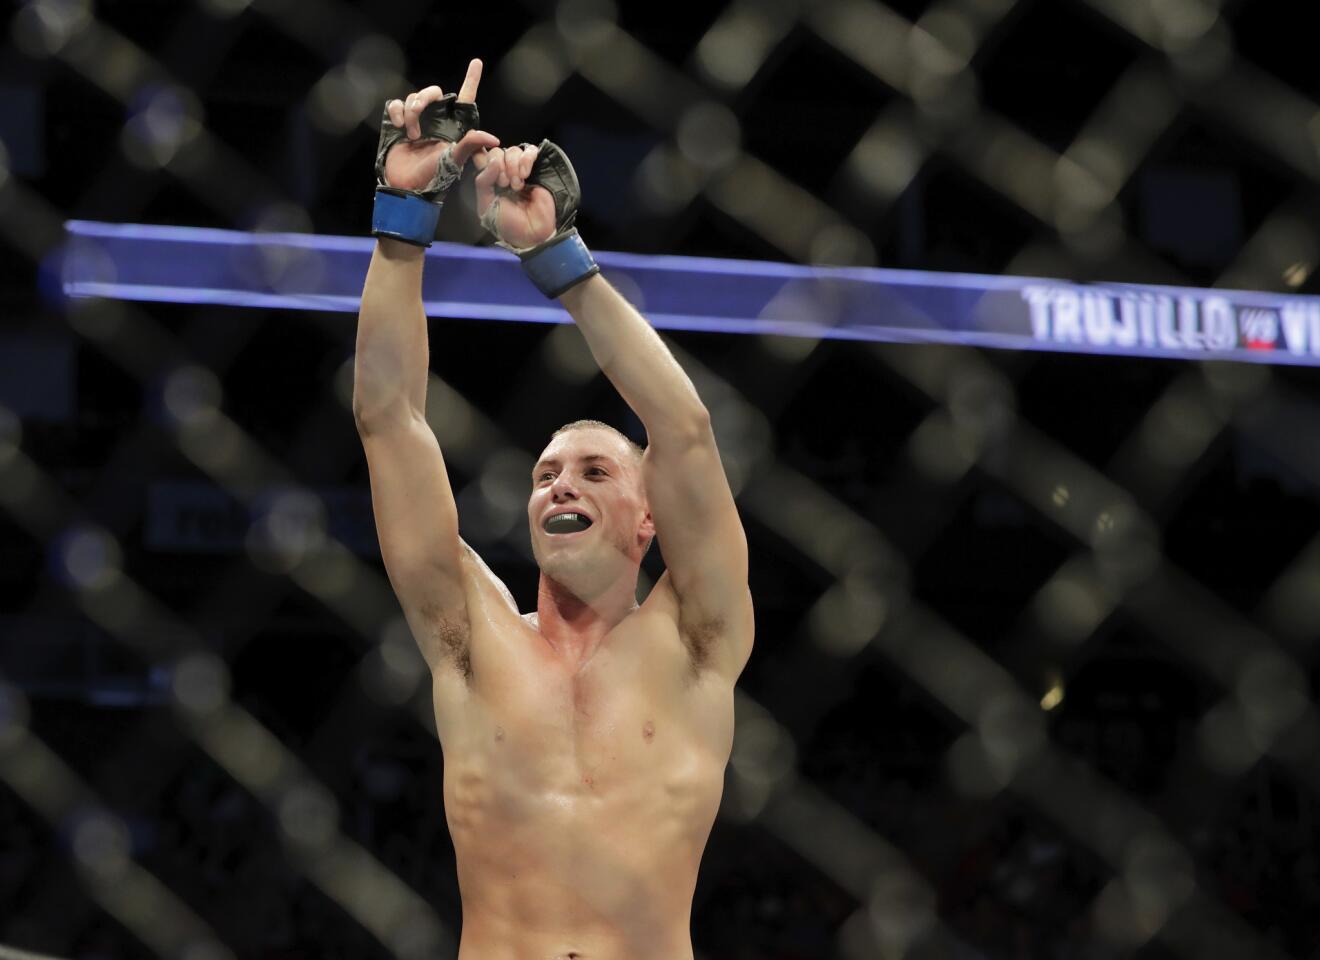 HOUSTON, TX - FEBRUARY 04: James Vick celebrates after defeating Abel Trujillo in the third round of their lightweight bout during the UFC Fight Night event at the Toyota Center on February 4, 2017 in Houston, Texas. (Photo by Tim Warner/Getty Images) ** OUTS - ELSENT, FPG, CM - OUTS * NM, PH, VA if sourced by CT, LA or MoD **